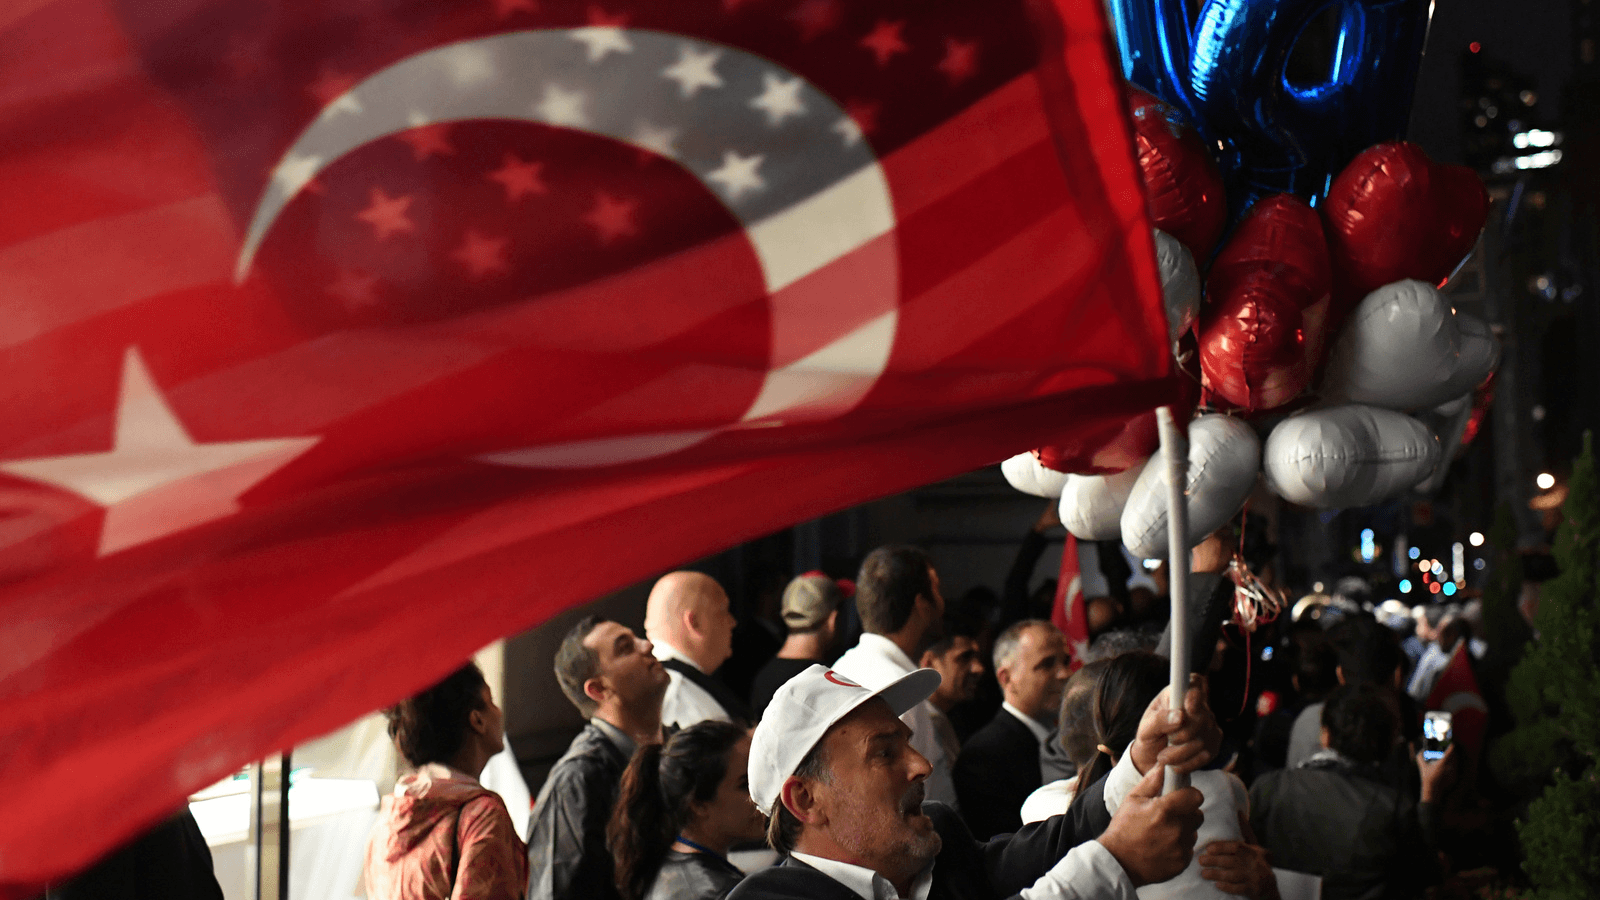 A supporter of Turkish President Tayyip Erdogan waves a US and Turkish flag as he waits for him to arrive outside of The Peninsula hotel in Manhattan, New York City, Sept. 19, 2017. 